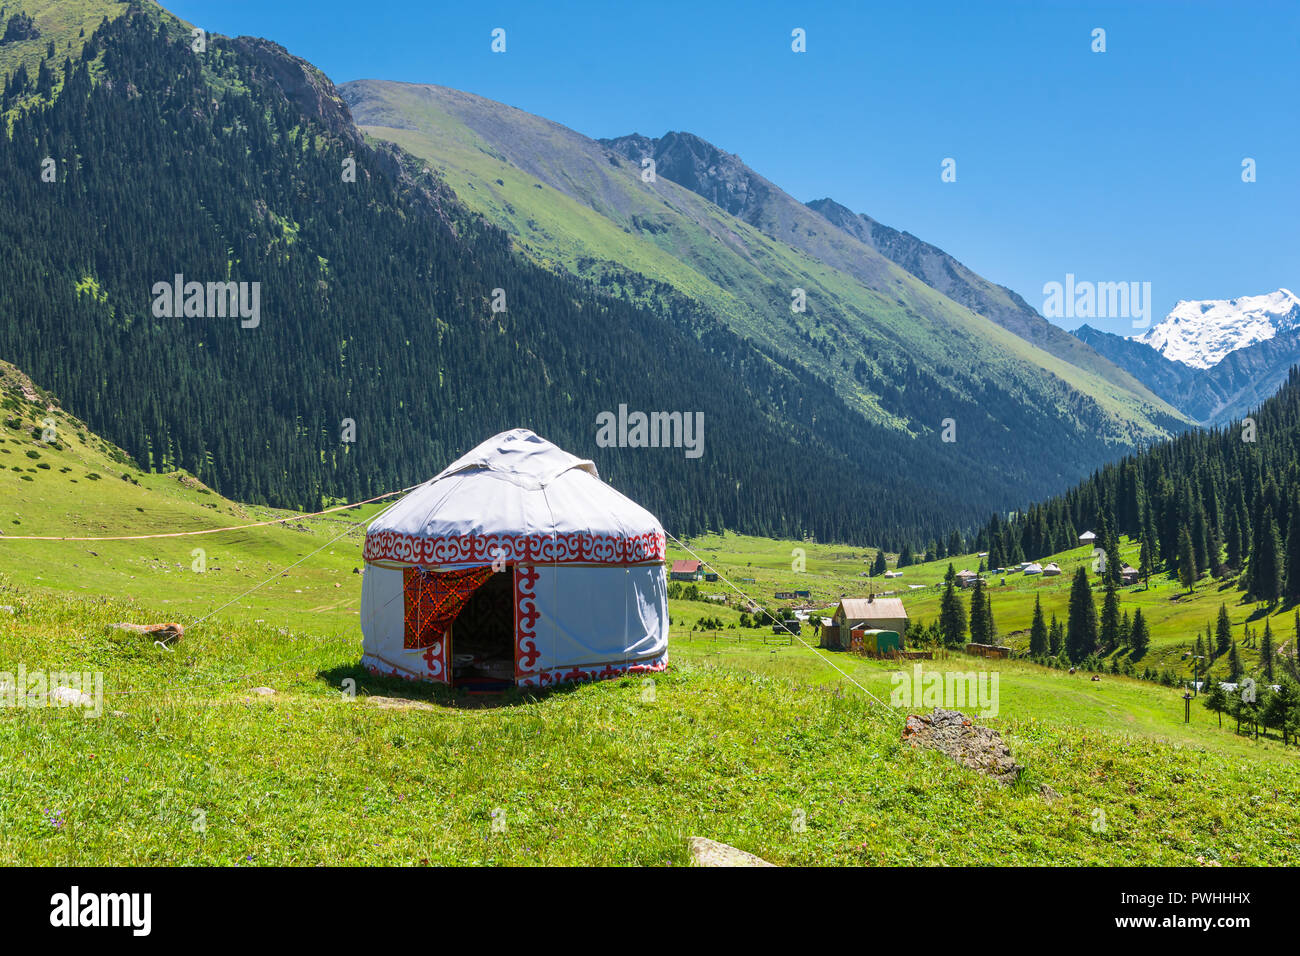 Beautiful mountain landscape with the white Yurt, decorated with a red ornament, Kyrgyzstan. Stock Photo